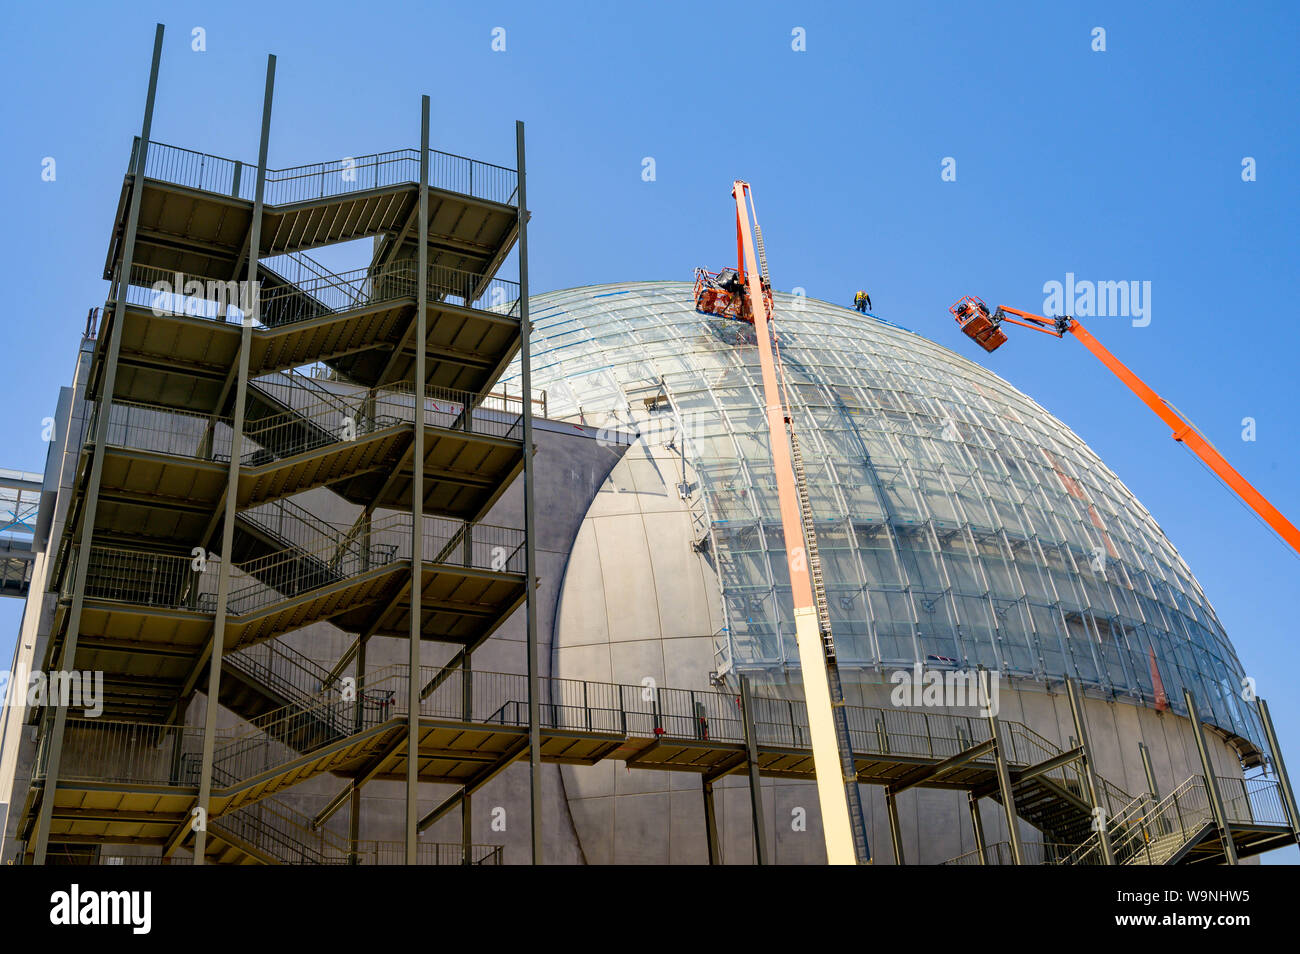 Los Angeles, California, USA. 12th Aug, 2019. Construction continues on the long delayed Academy Museum of Motion Pictures. Originally slated to open in 2019, the dater has been pushed back until after the Oscars ceremony in February 2020. Construction challenges with the Death Star-like structure and the renovation of the 1939 May Company building have ballooned the original $250 million dollar cost cost estimate to a projected $388 million. Credit: Stan Sholik/ZUMA Wire/Alamy Live News Stock Photo